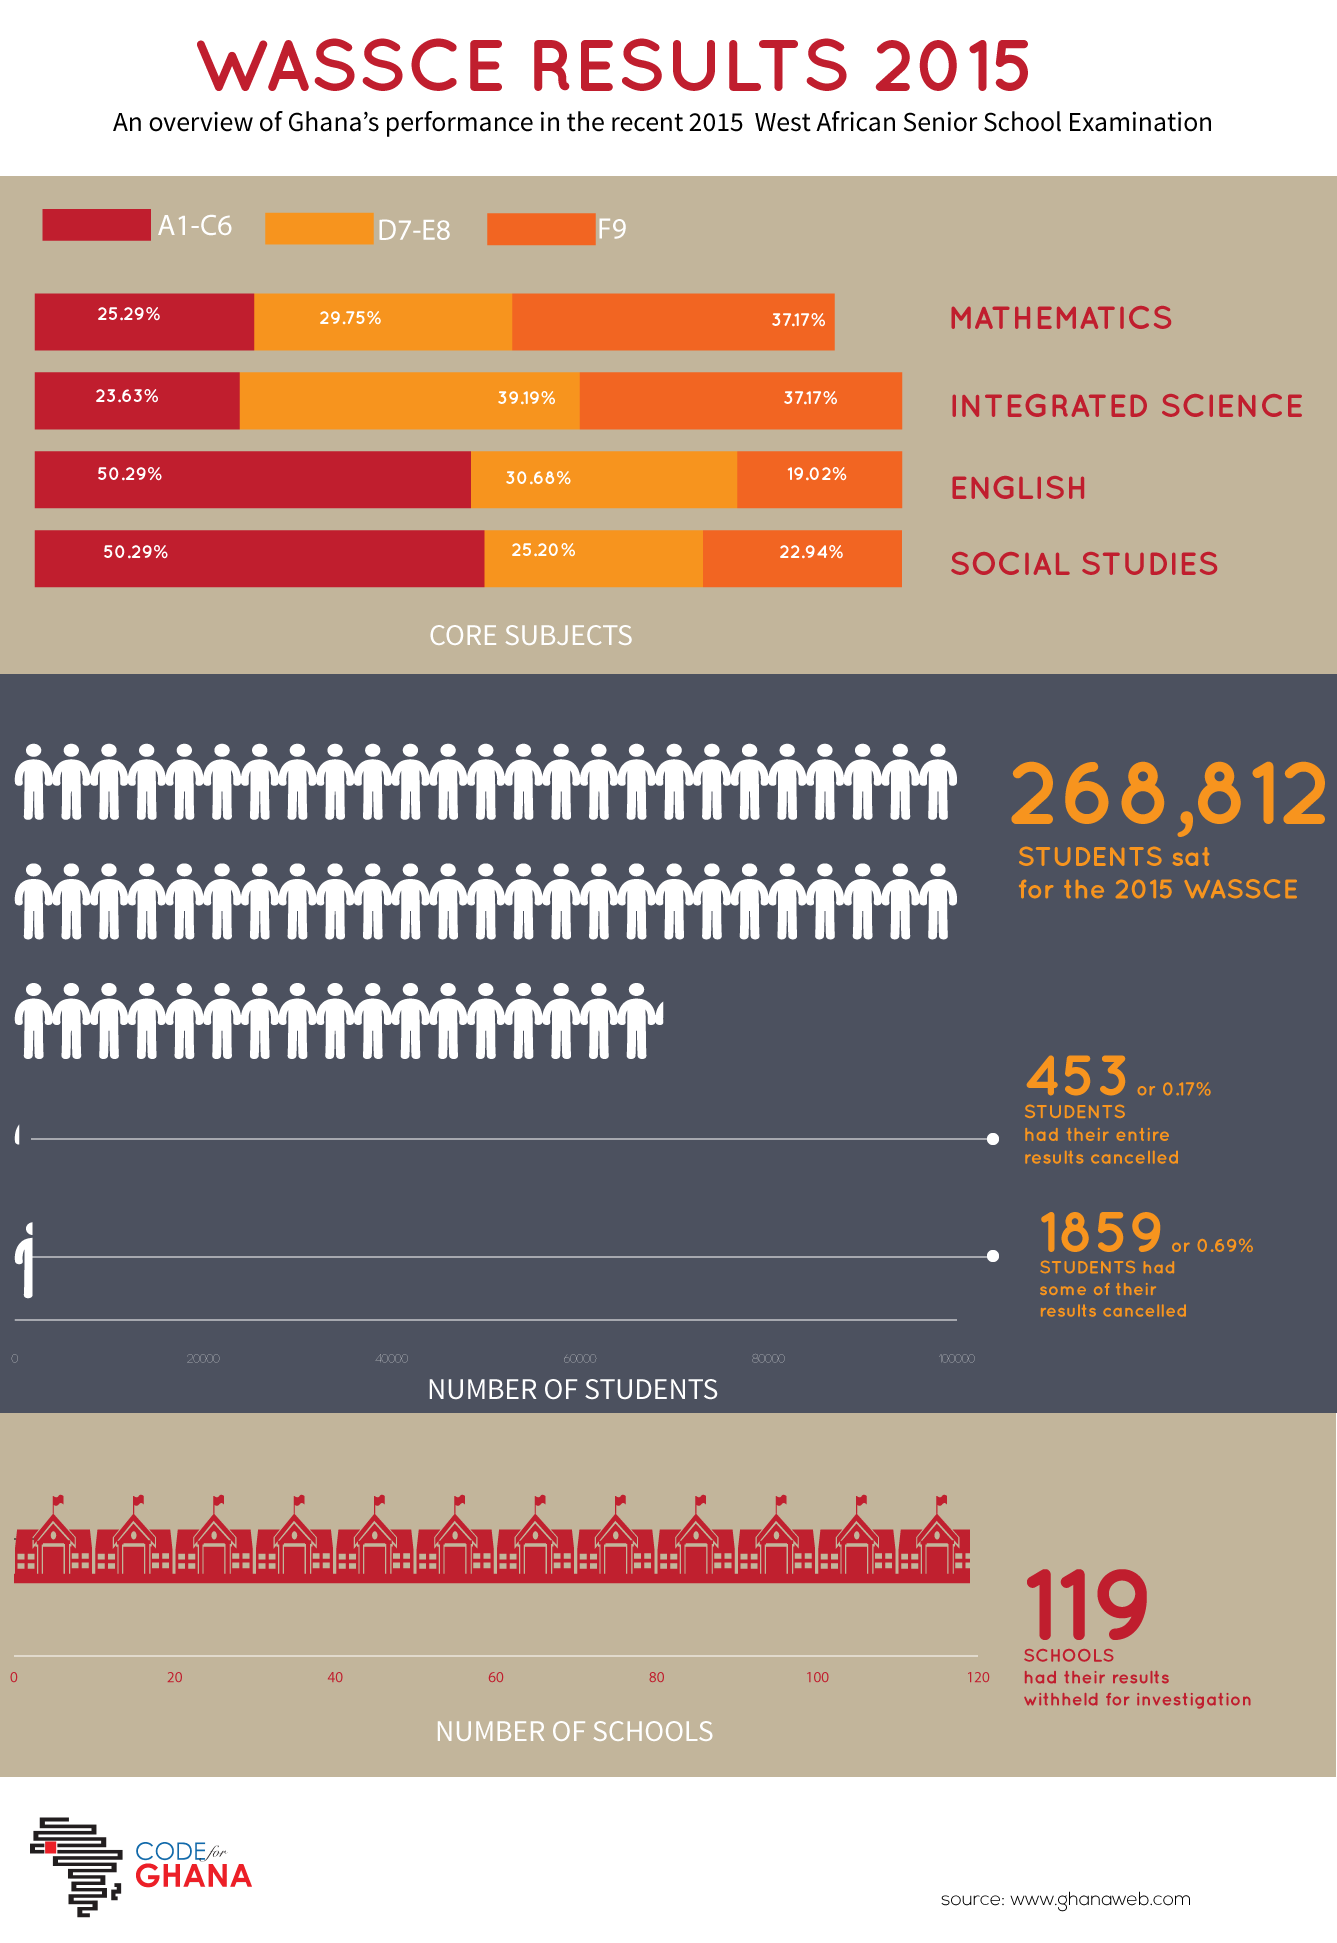 WAEC 2015 RESULTS INFOGRAPHIC